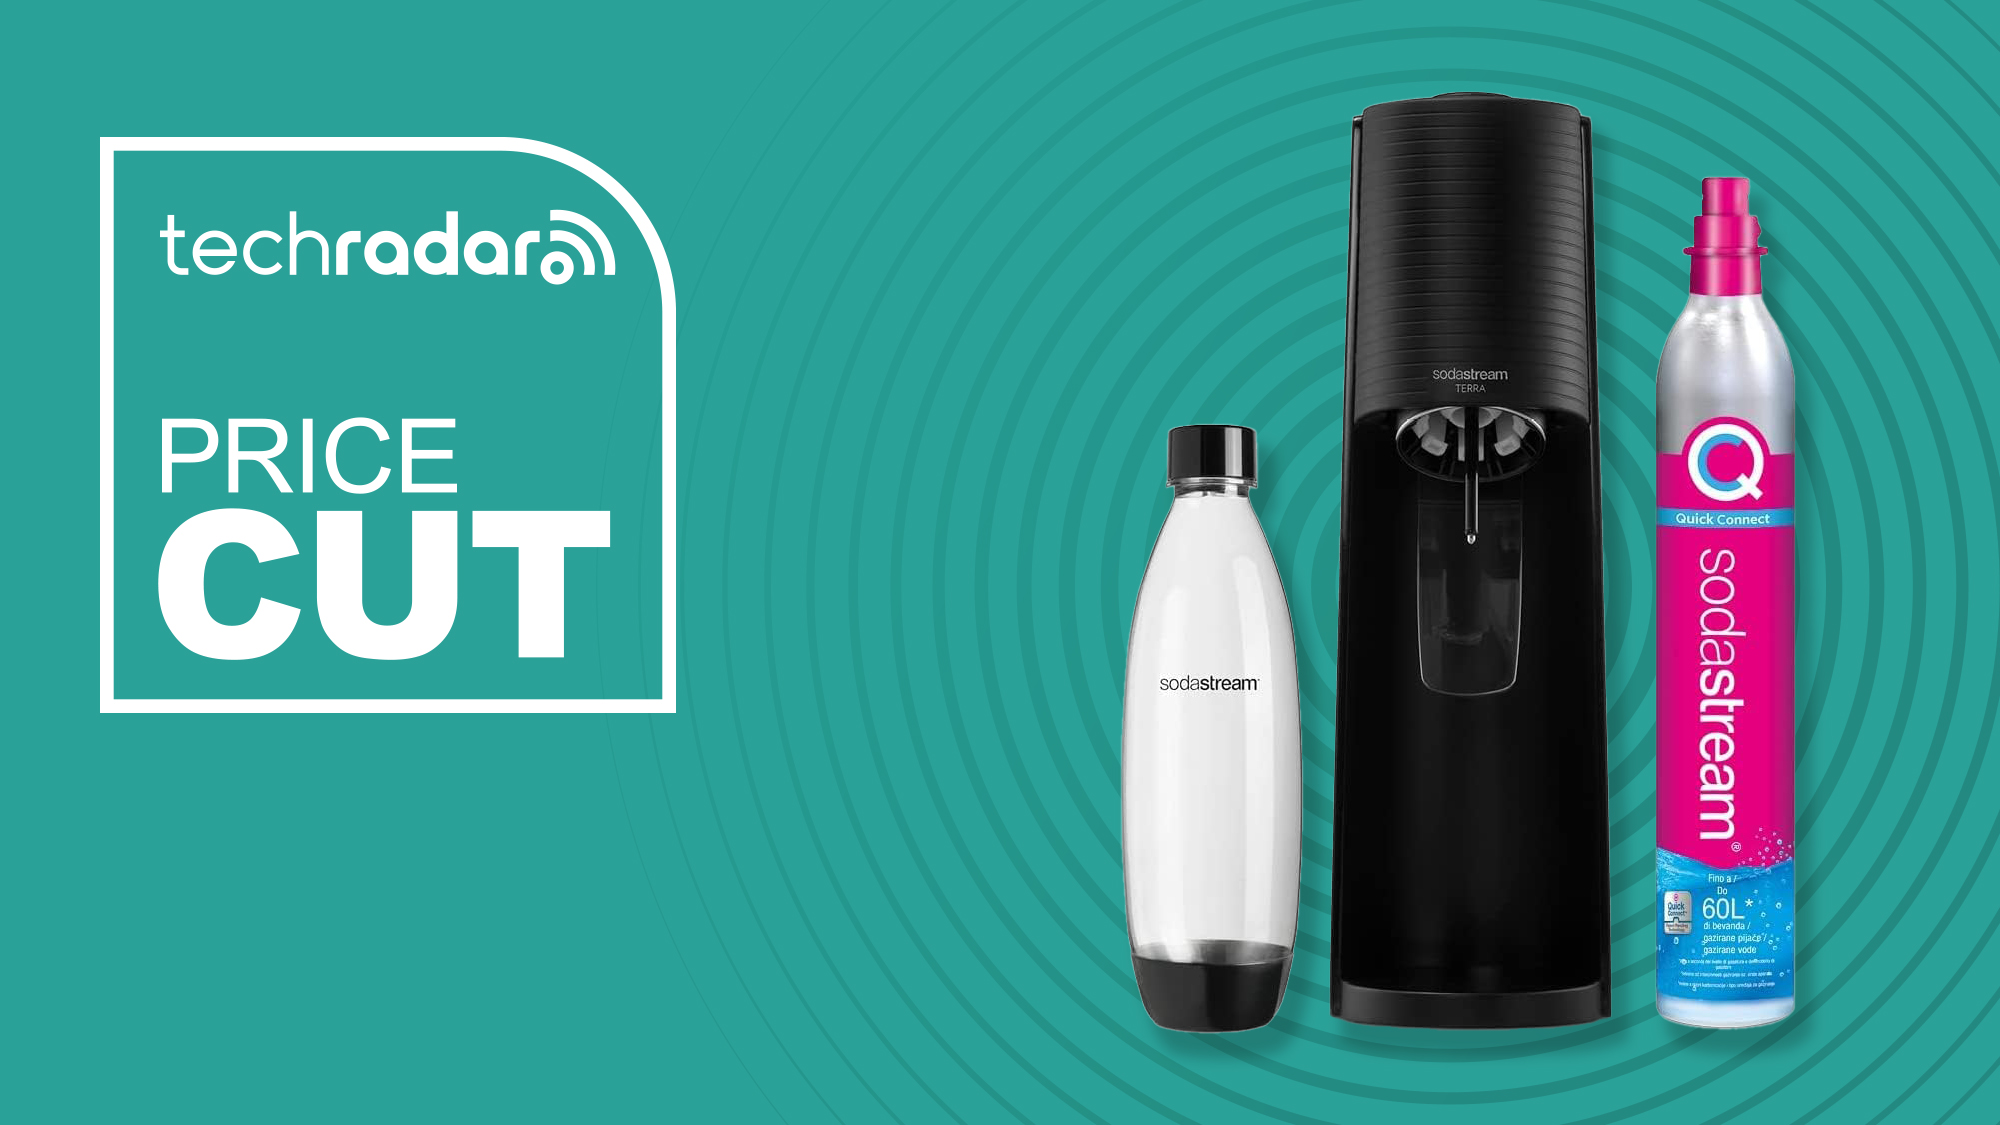 This Sodastream Terra deal just made reducing plastic waste even cheaper